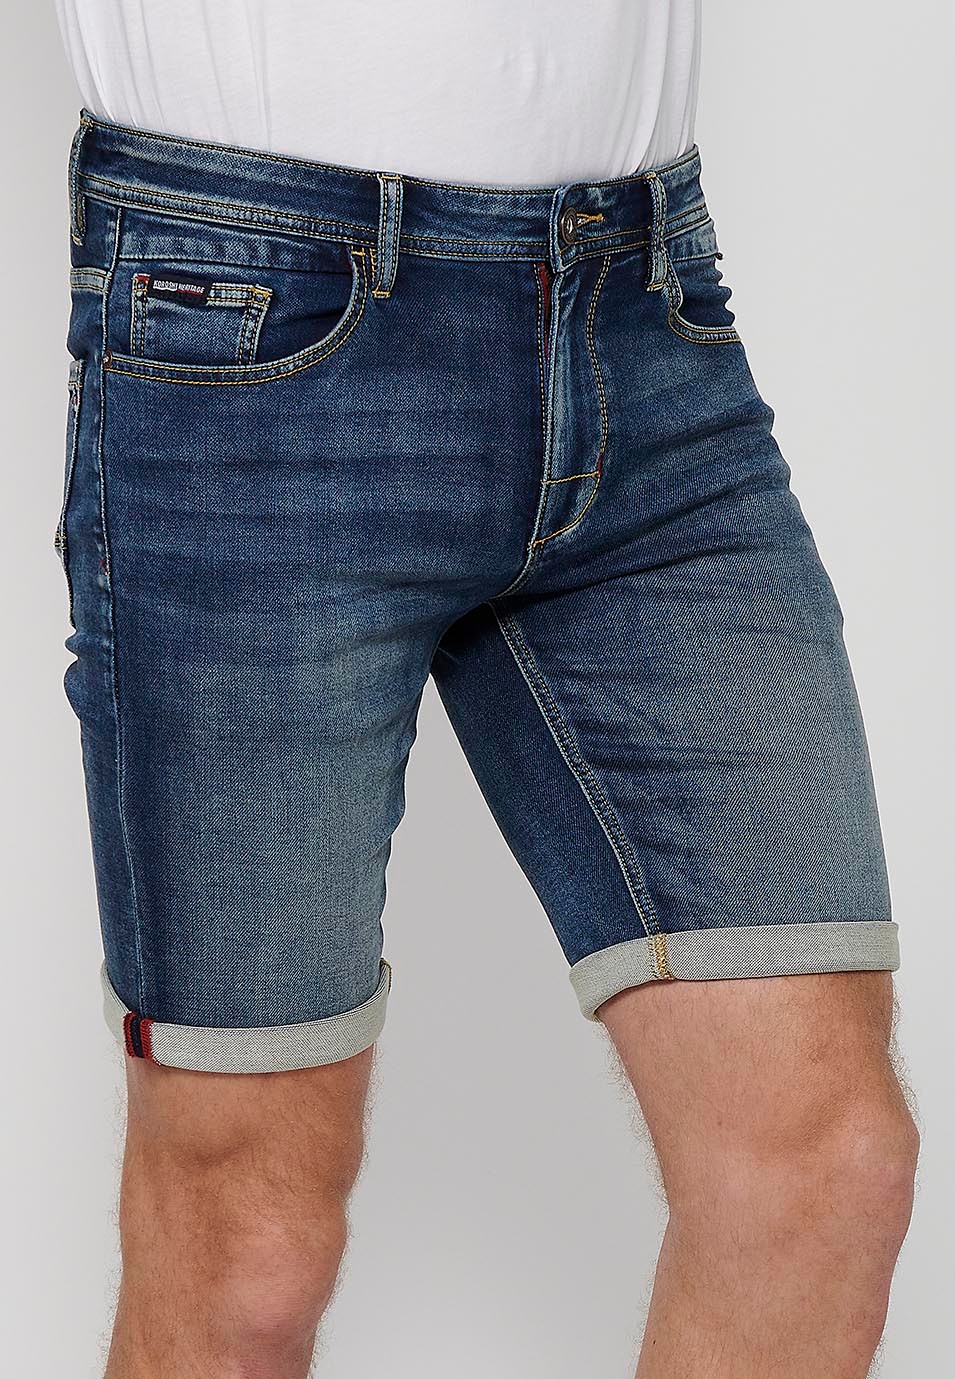 Bermuda shorts with turn-up closure with front zip and button closure in Blue for Men 2